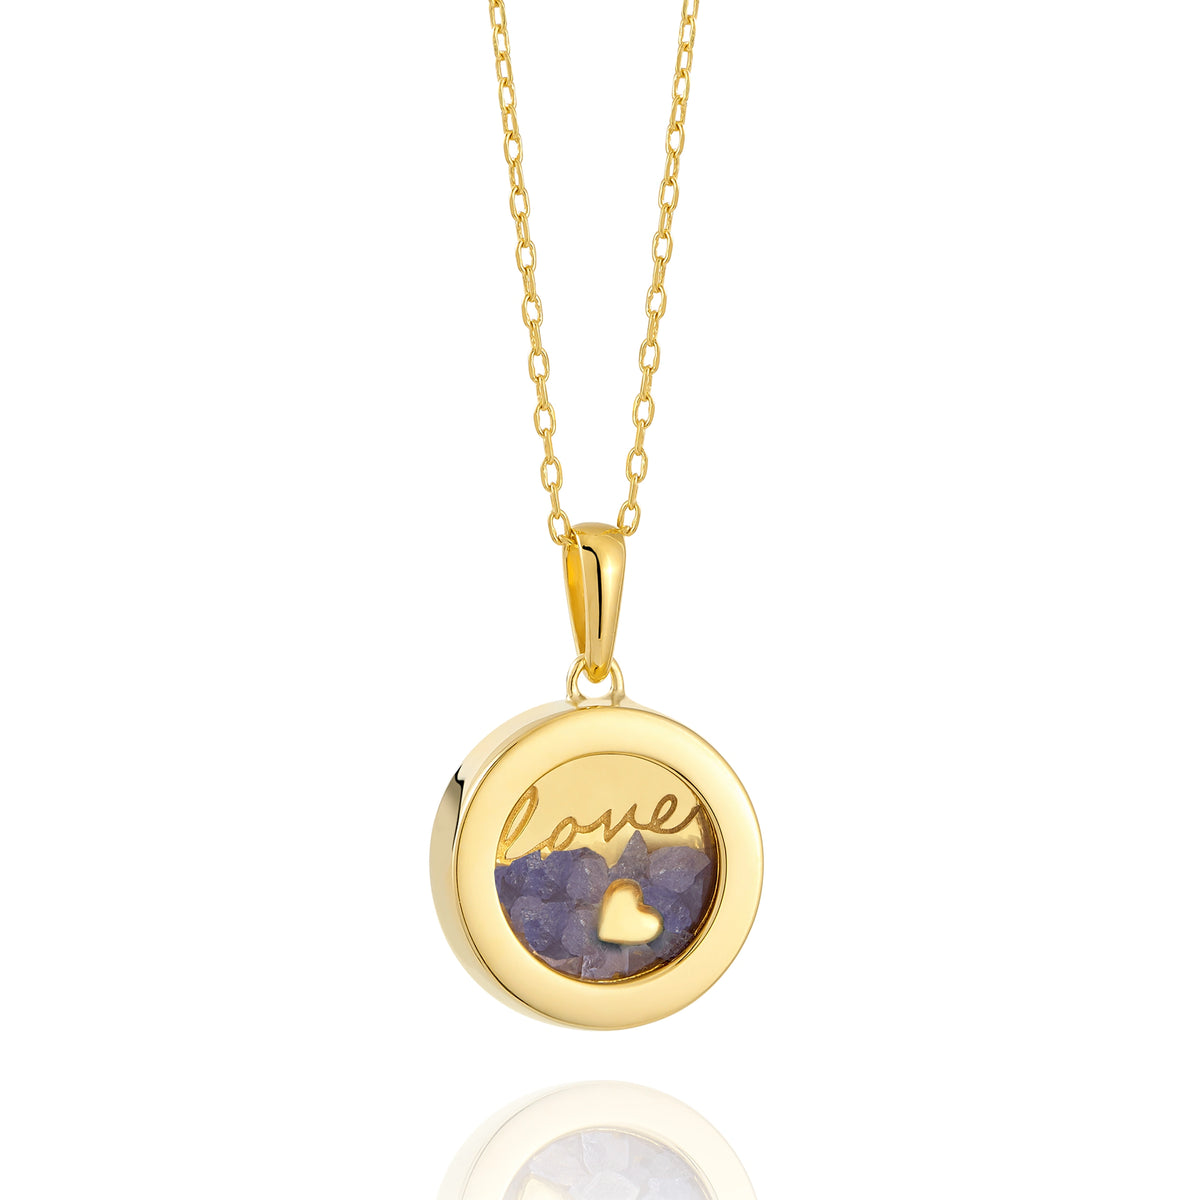 Gold birthstone necklace with &#39;love&#39; engraving and amethyst birthstone